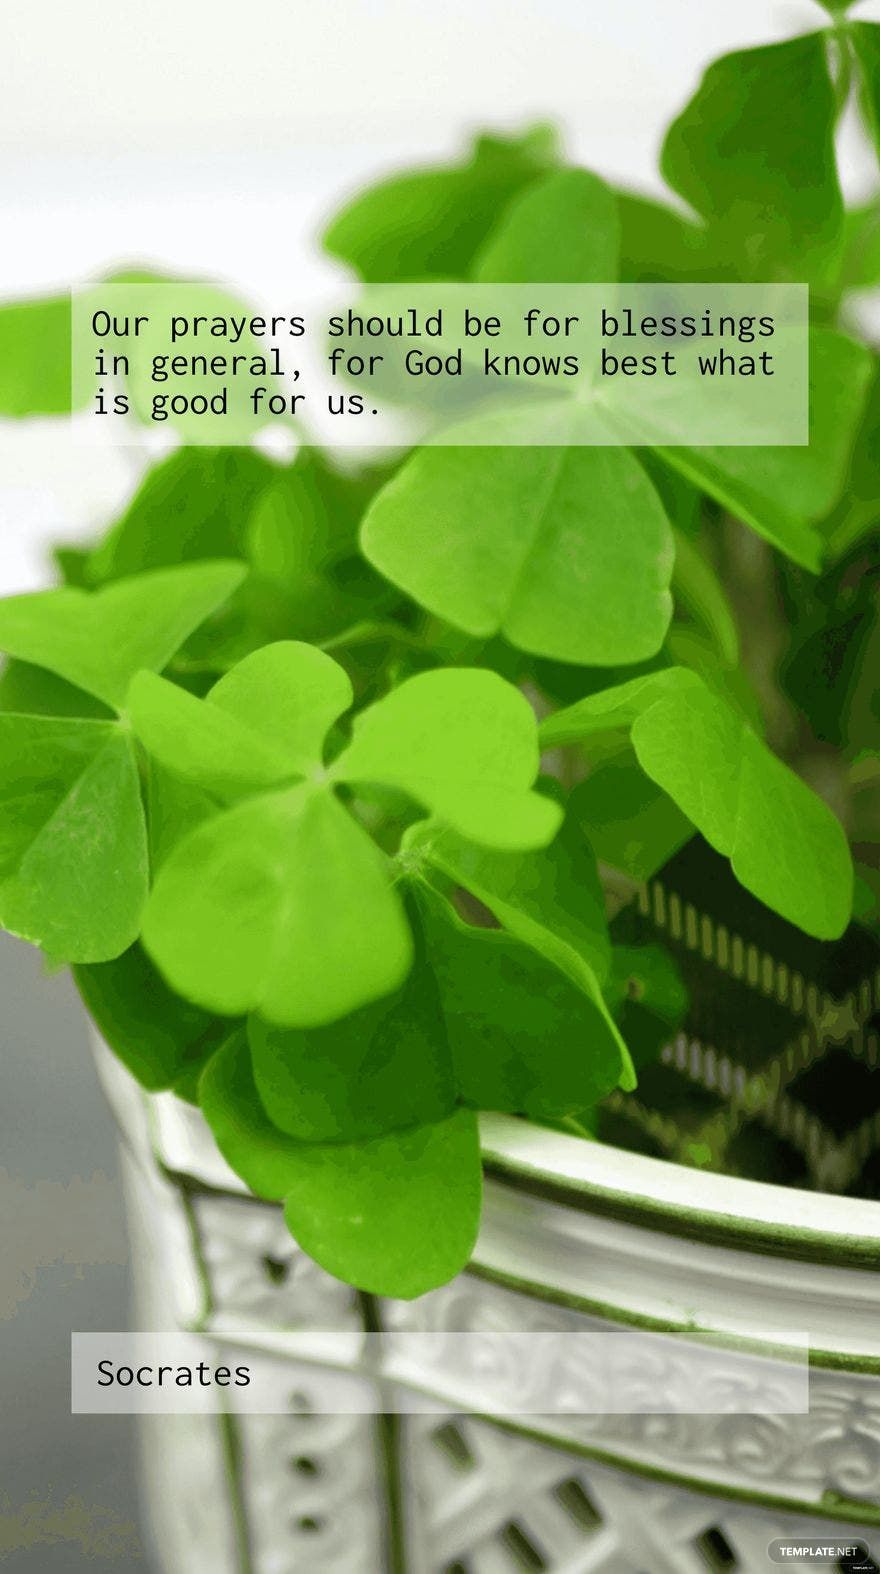 Socrates - Our prayers should be for blessings in general, for God knows best what is good for us. in JPEG